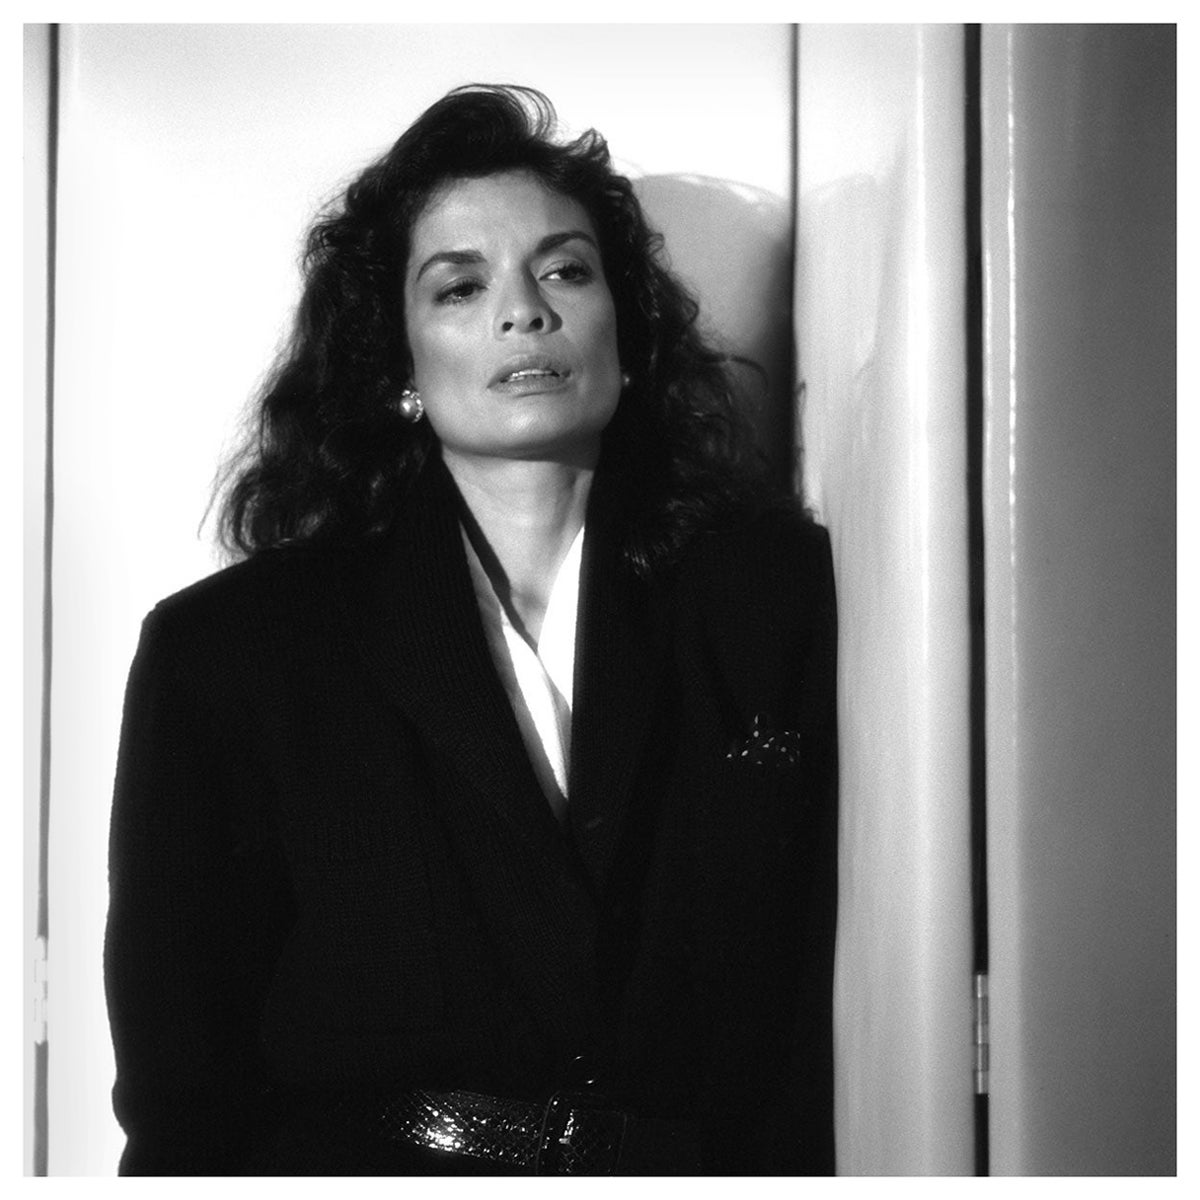 Vintage Photograph of Bianca Jagger, 1983, NYC